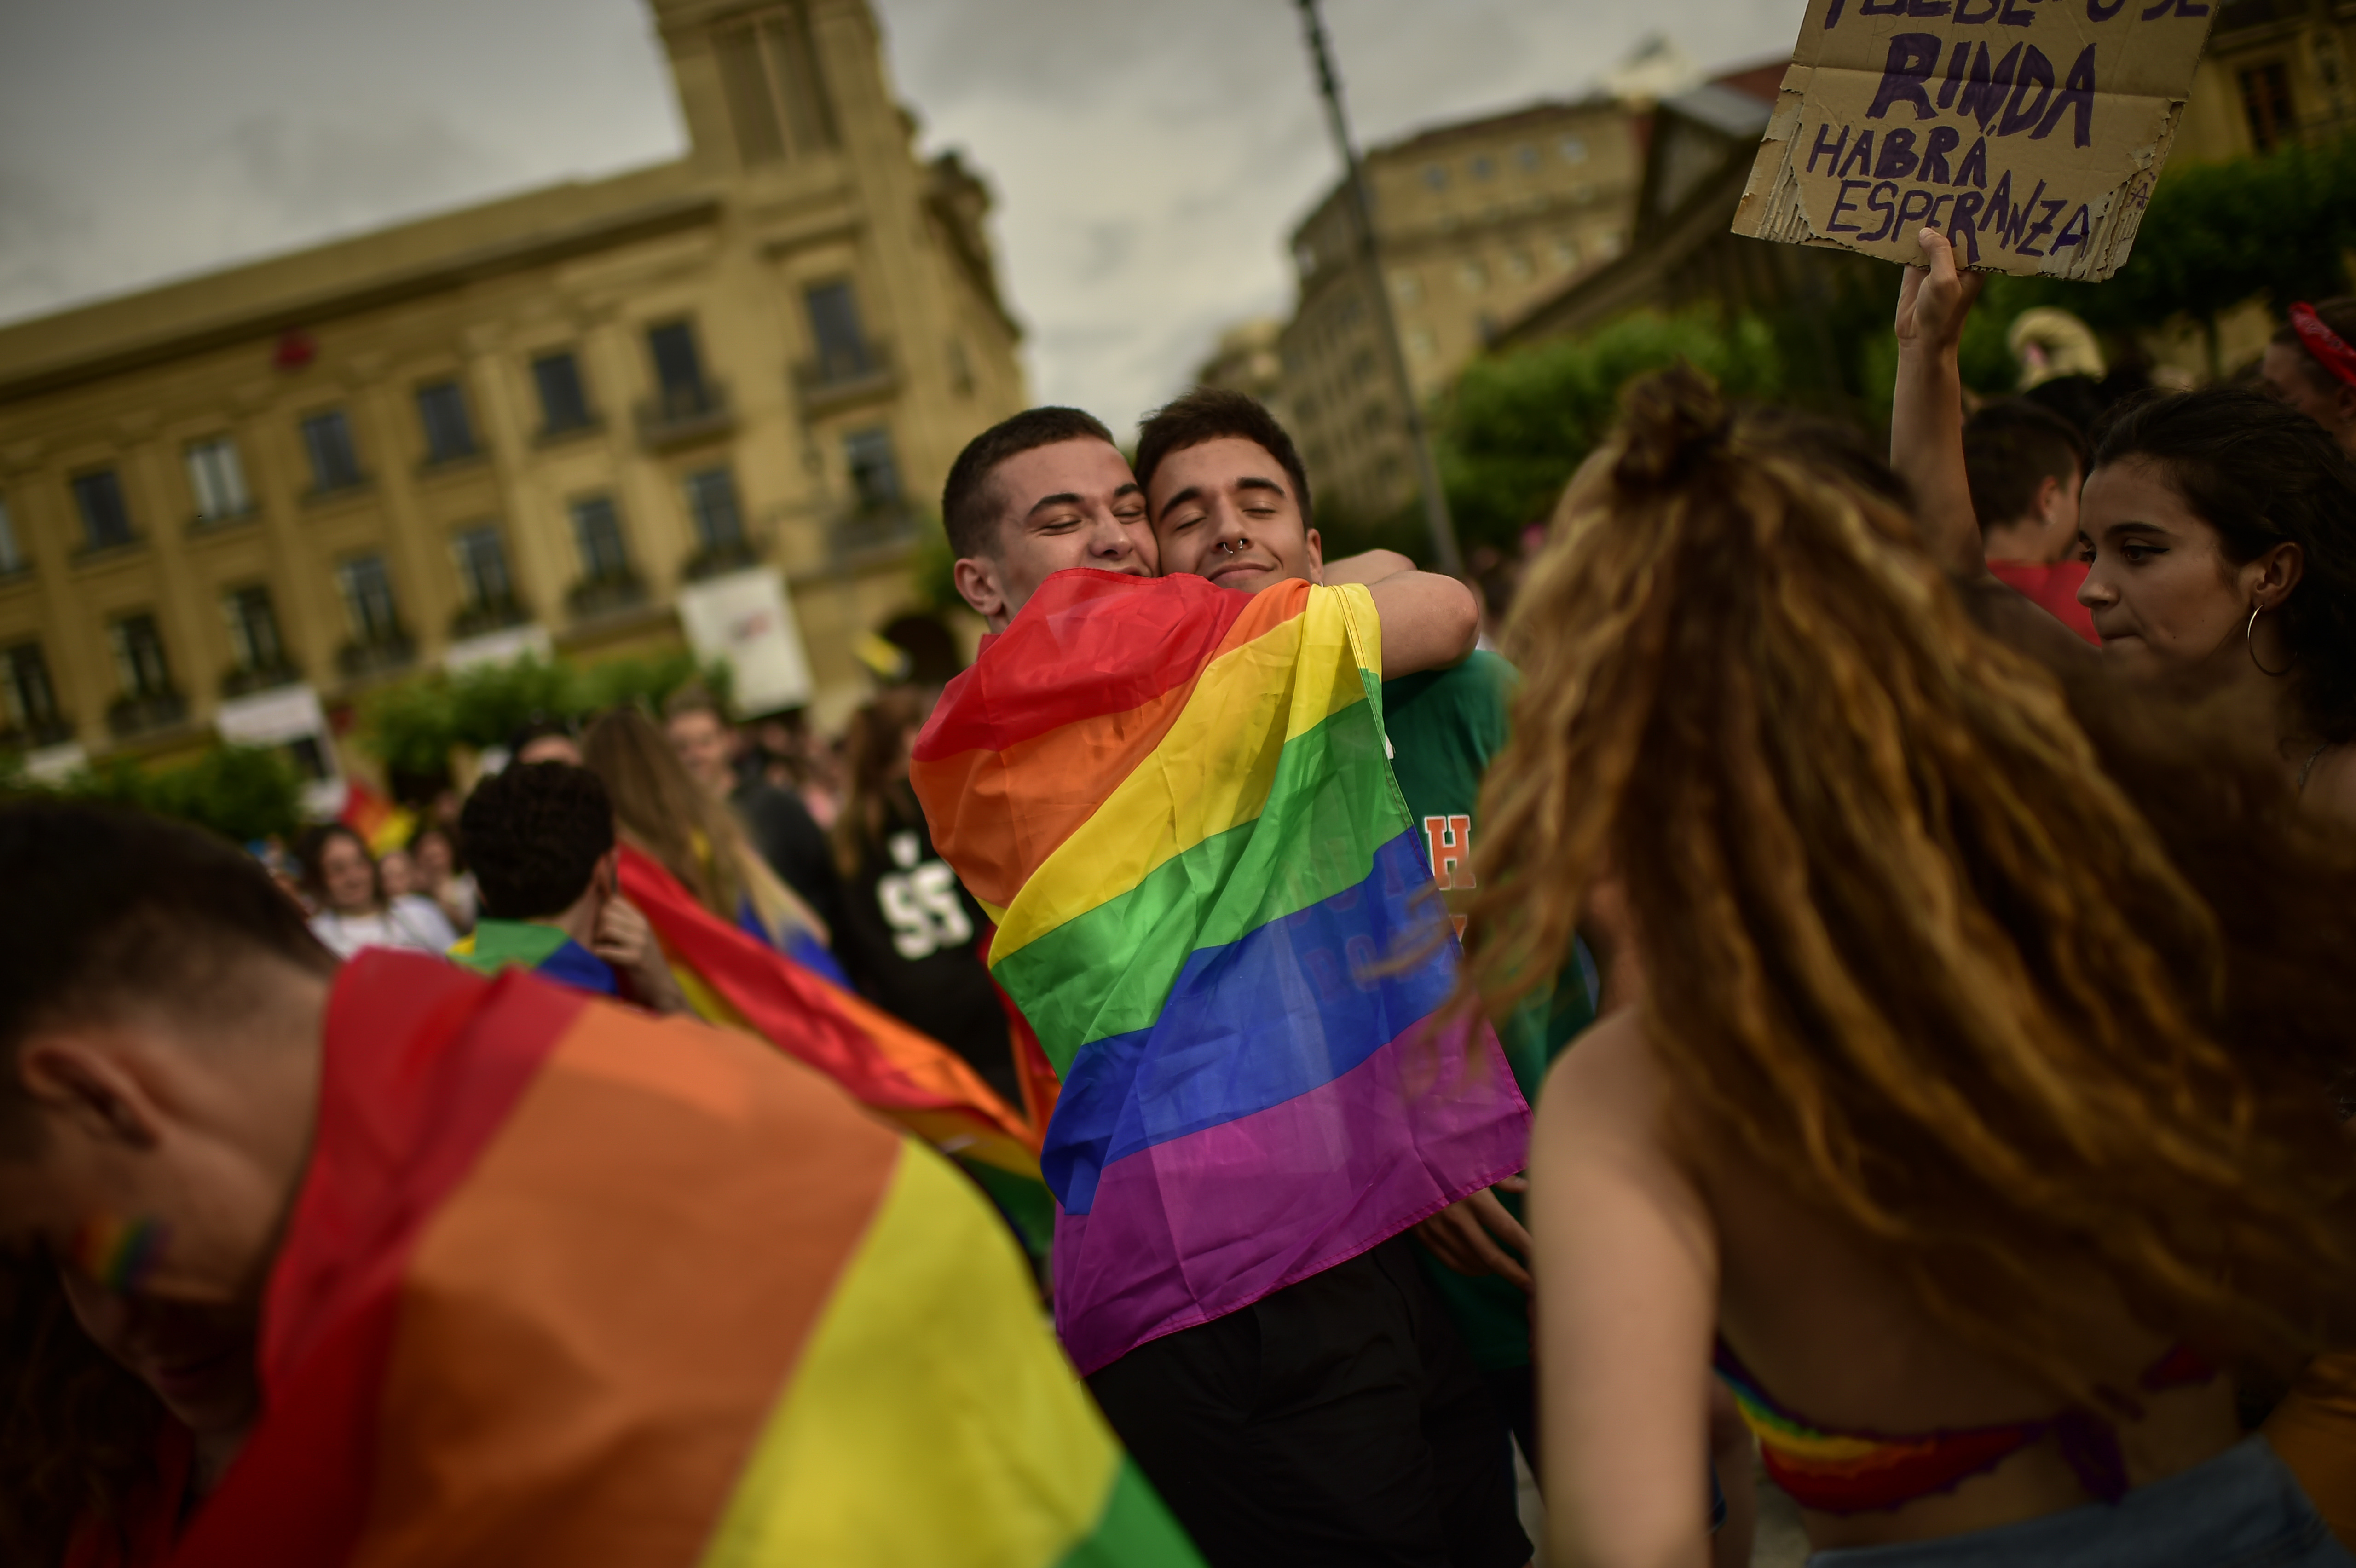 Demonstrators wrapped in a rainbow flag take part in a protest to support transsexual people fighting for their rights during the LGBT Pride Day, in Pamplona, Spain in June 2018. Eldiario.es has extensively covered LGBT rights in the country